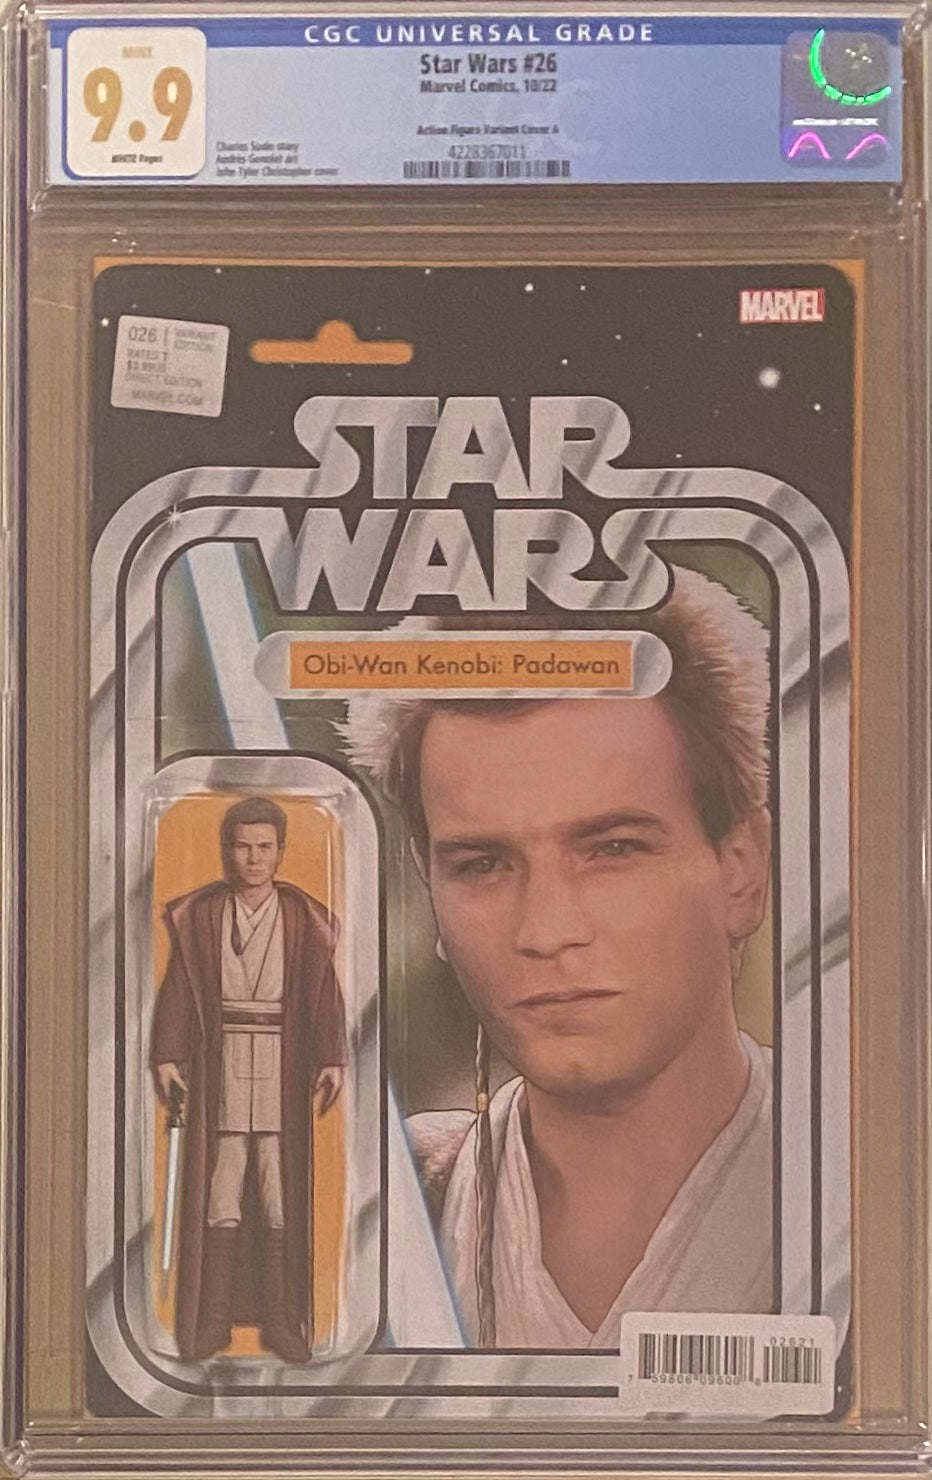 Star Wars #26 Action Figure Variant CGC 9.9 - Many First Appearances